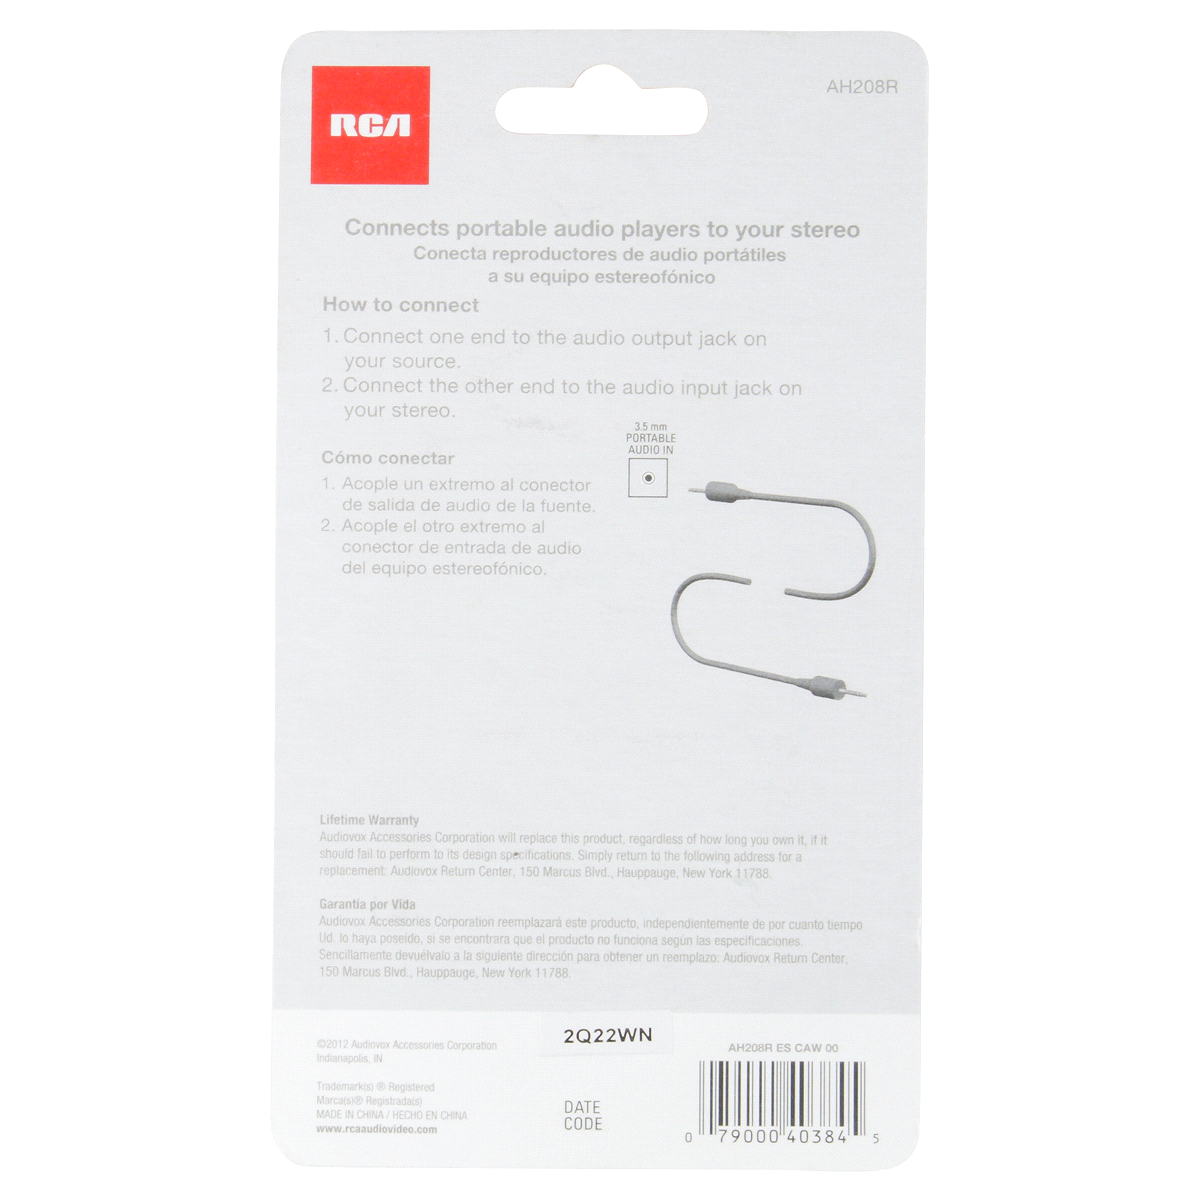 slide 2 of 2, RCA Extension Cable Ah208r 3.5mm, 6 ft